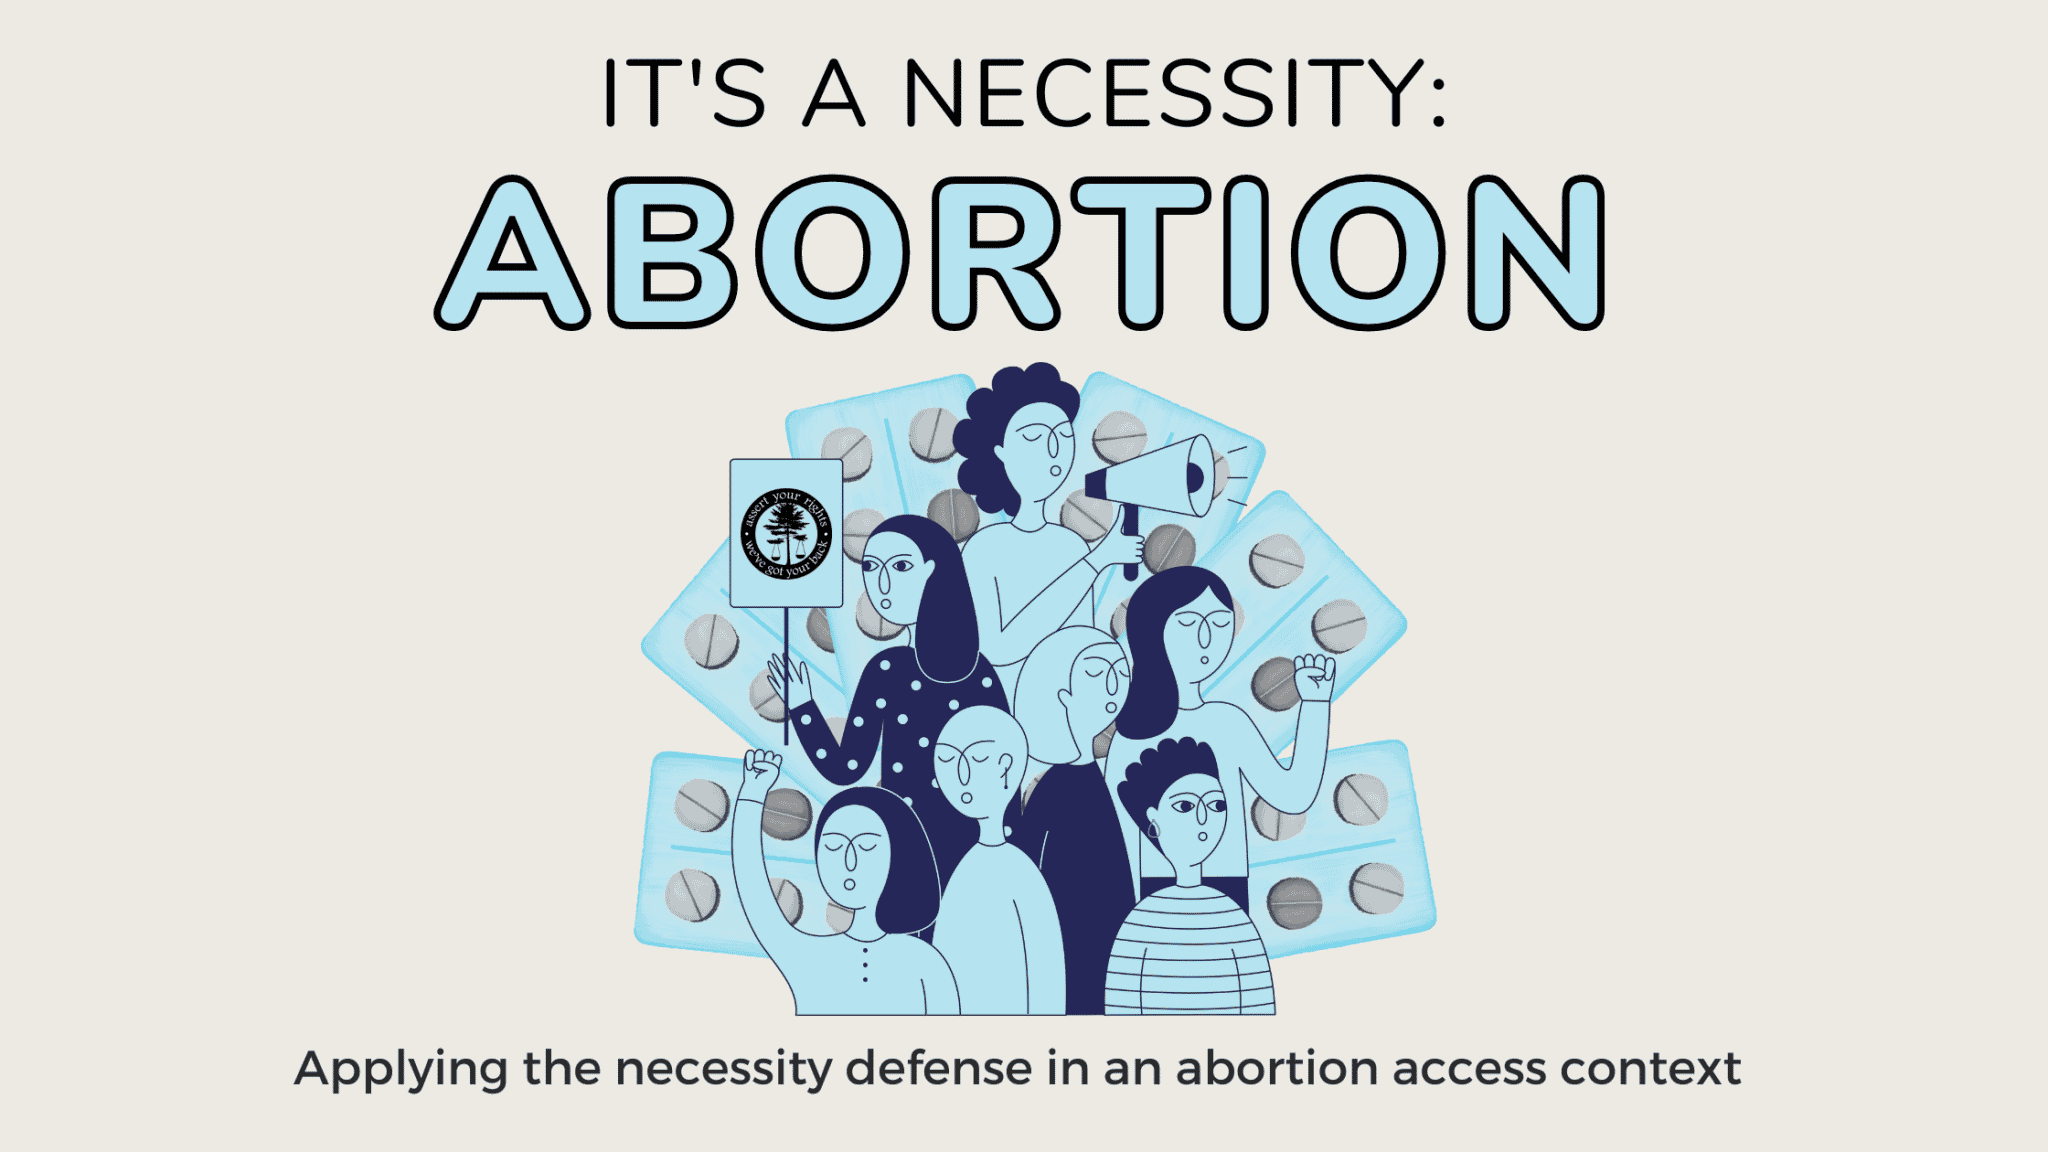 An ivory background with a blue and grey image at center that depicts femme and non-binary people of different racial identities holding their fists up or a protest sign. Behind them are blister-packs of pills to represent abortion pills. Text reads: IT'S A NECESSITY: ABORTION. APPLYING THE NECESSITY DEFENSE IN THE ABORTION ACCESS CONTEXT.